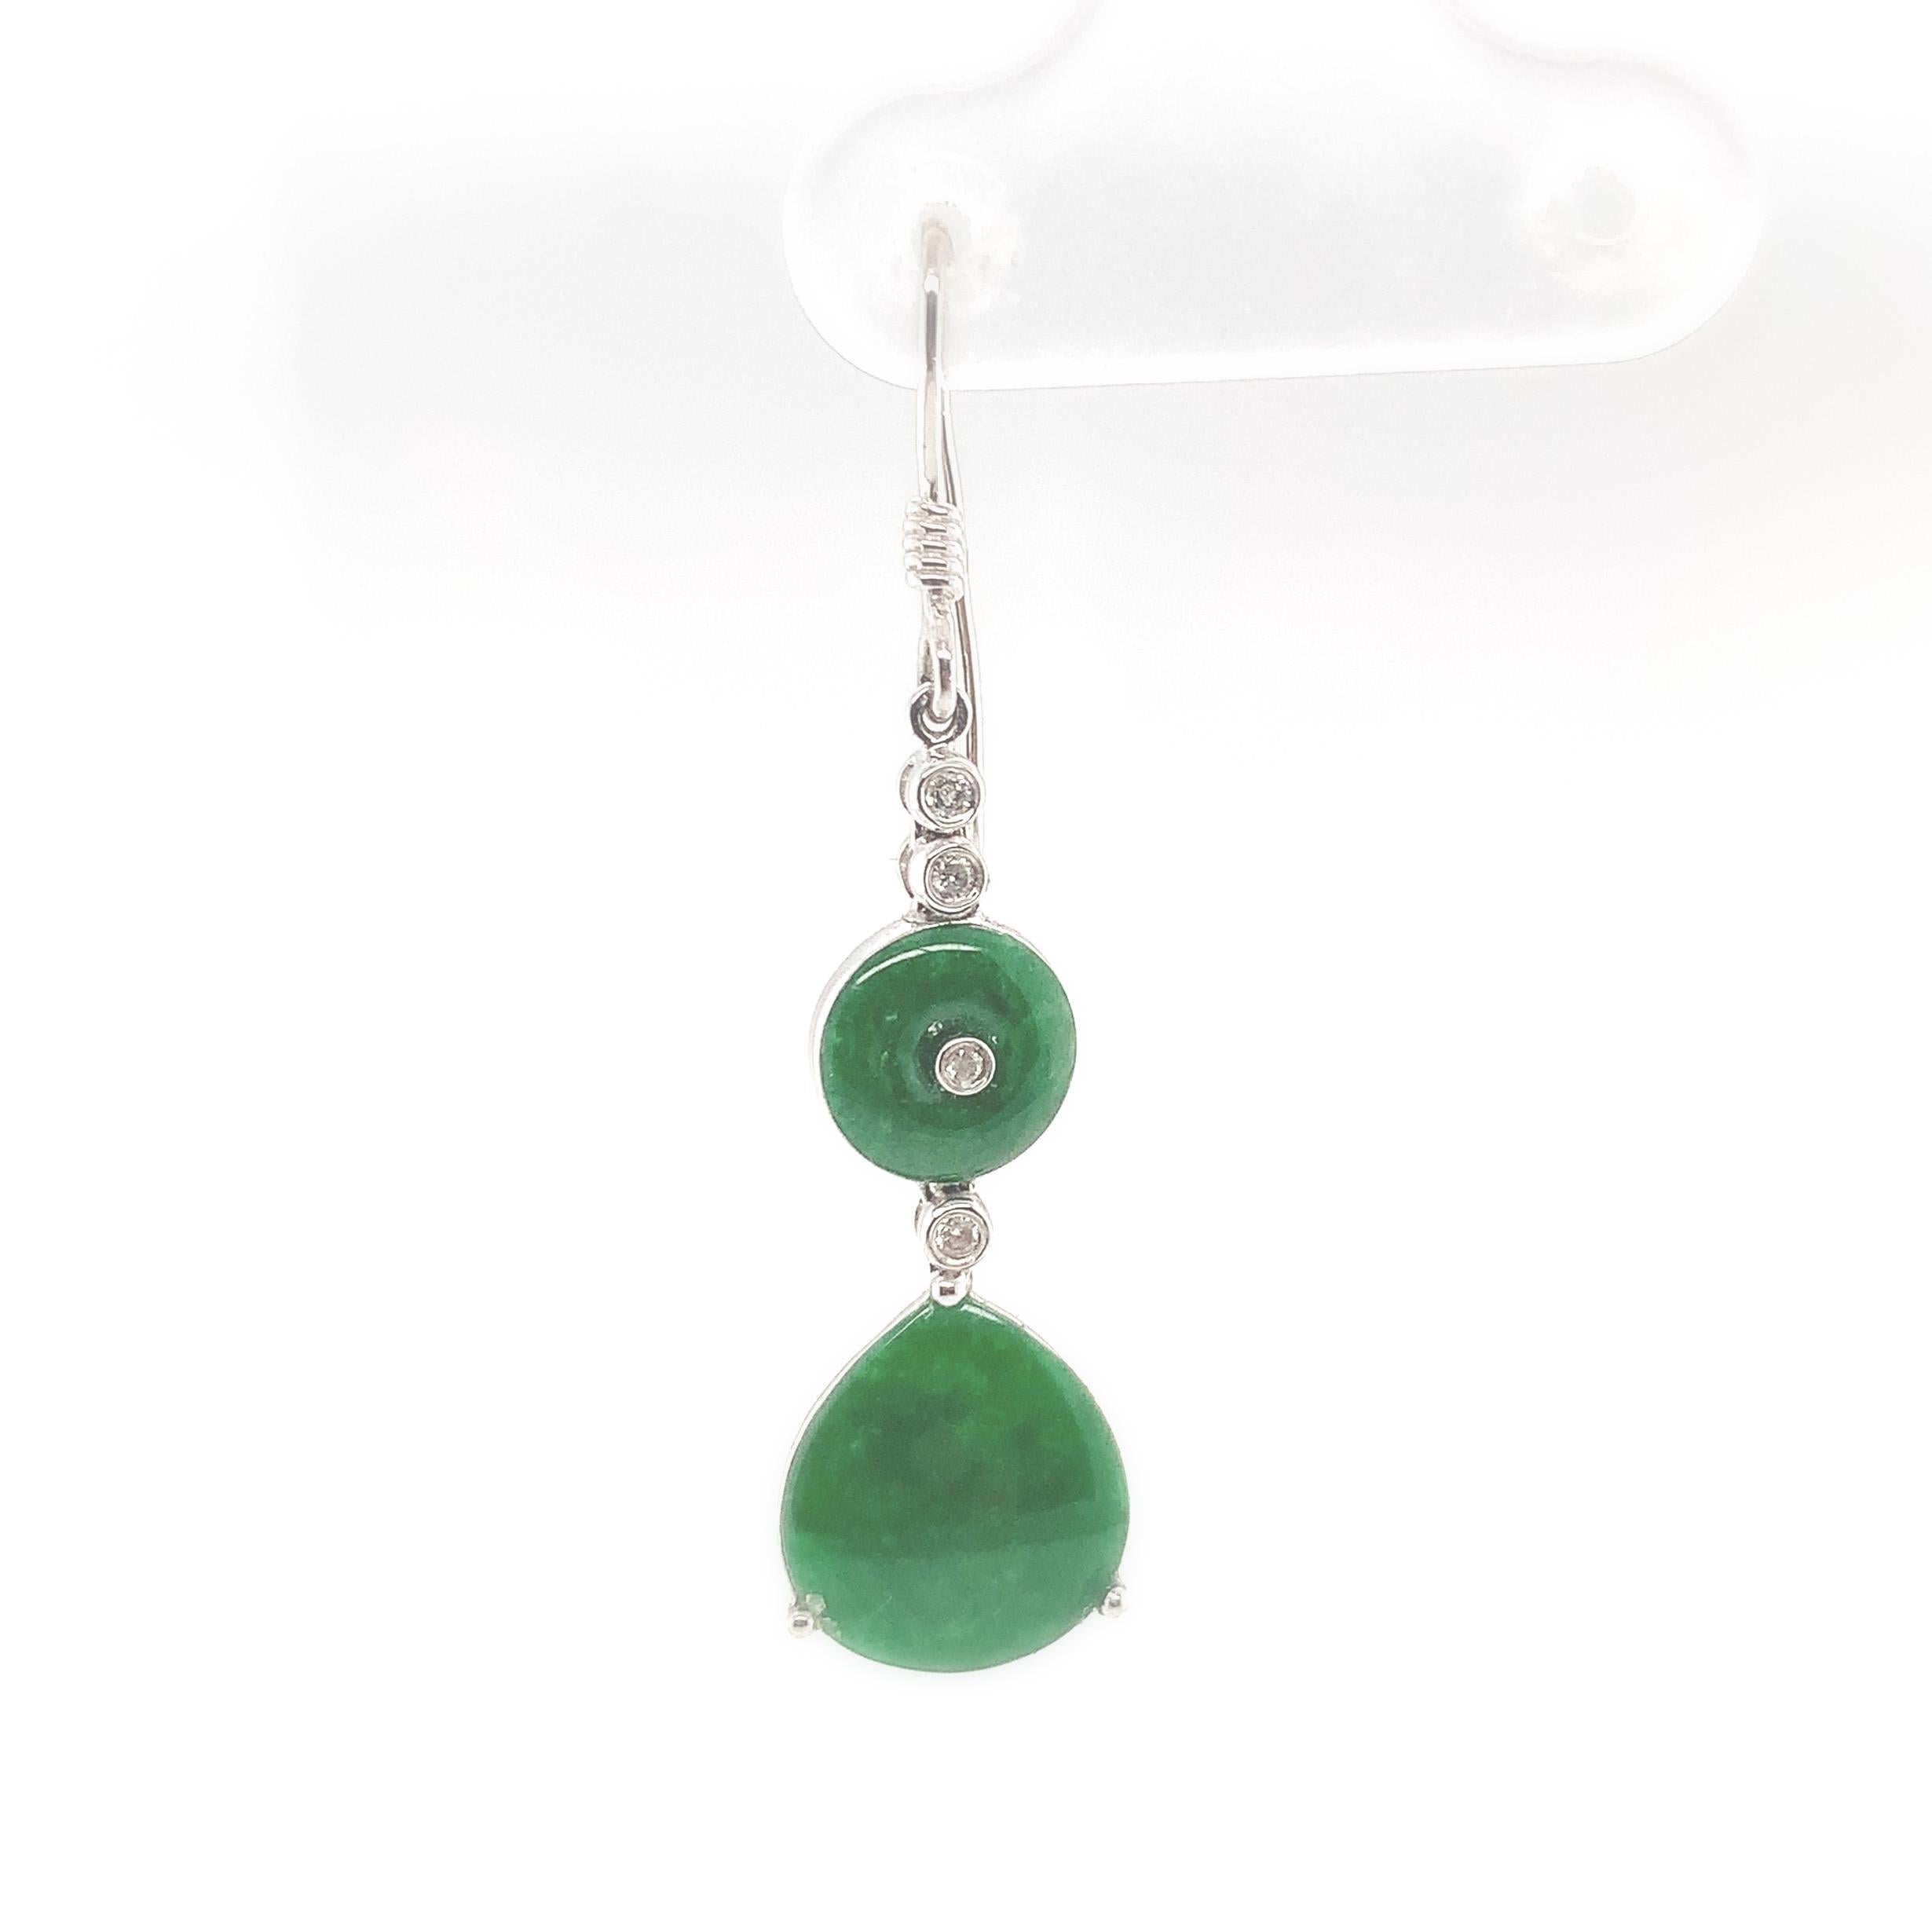 A pair of 18K white gold drop earrings featuring green jadeite jade and diamonds. Each earring has a round disk shape jade and a rounded pear shaped jade drop. The round jade measures about 7mm diameter and the rounded pear measures about 10mm x